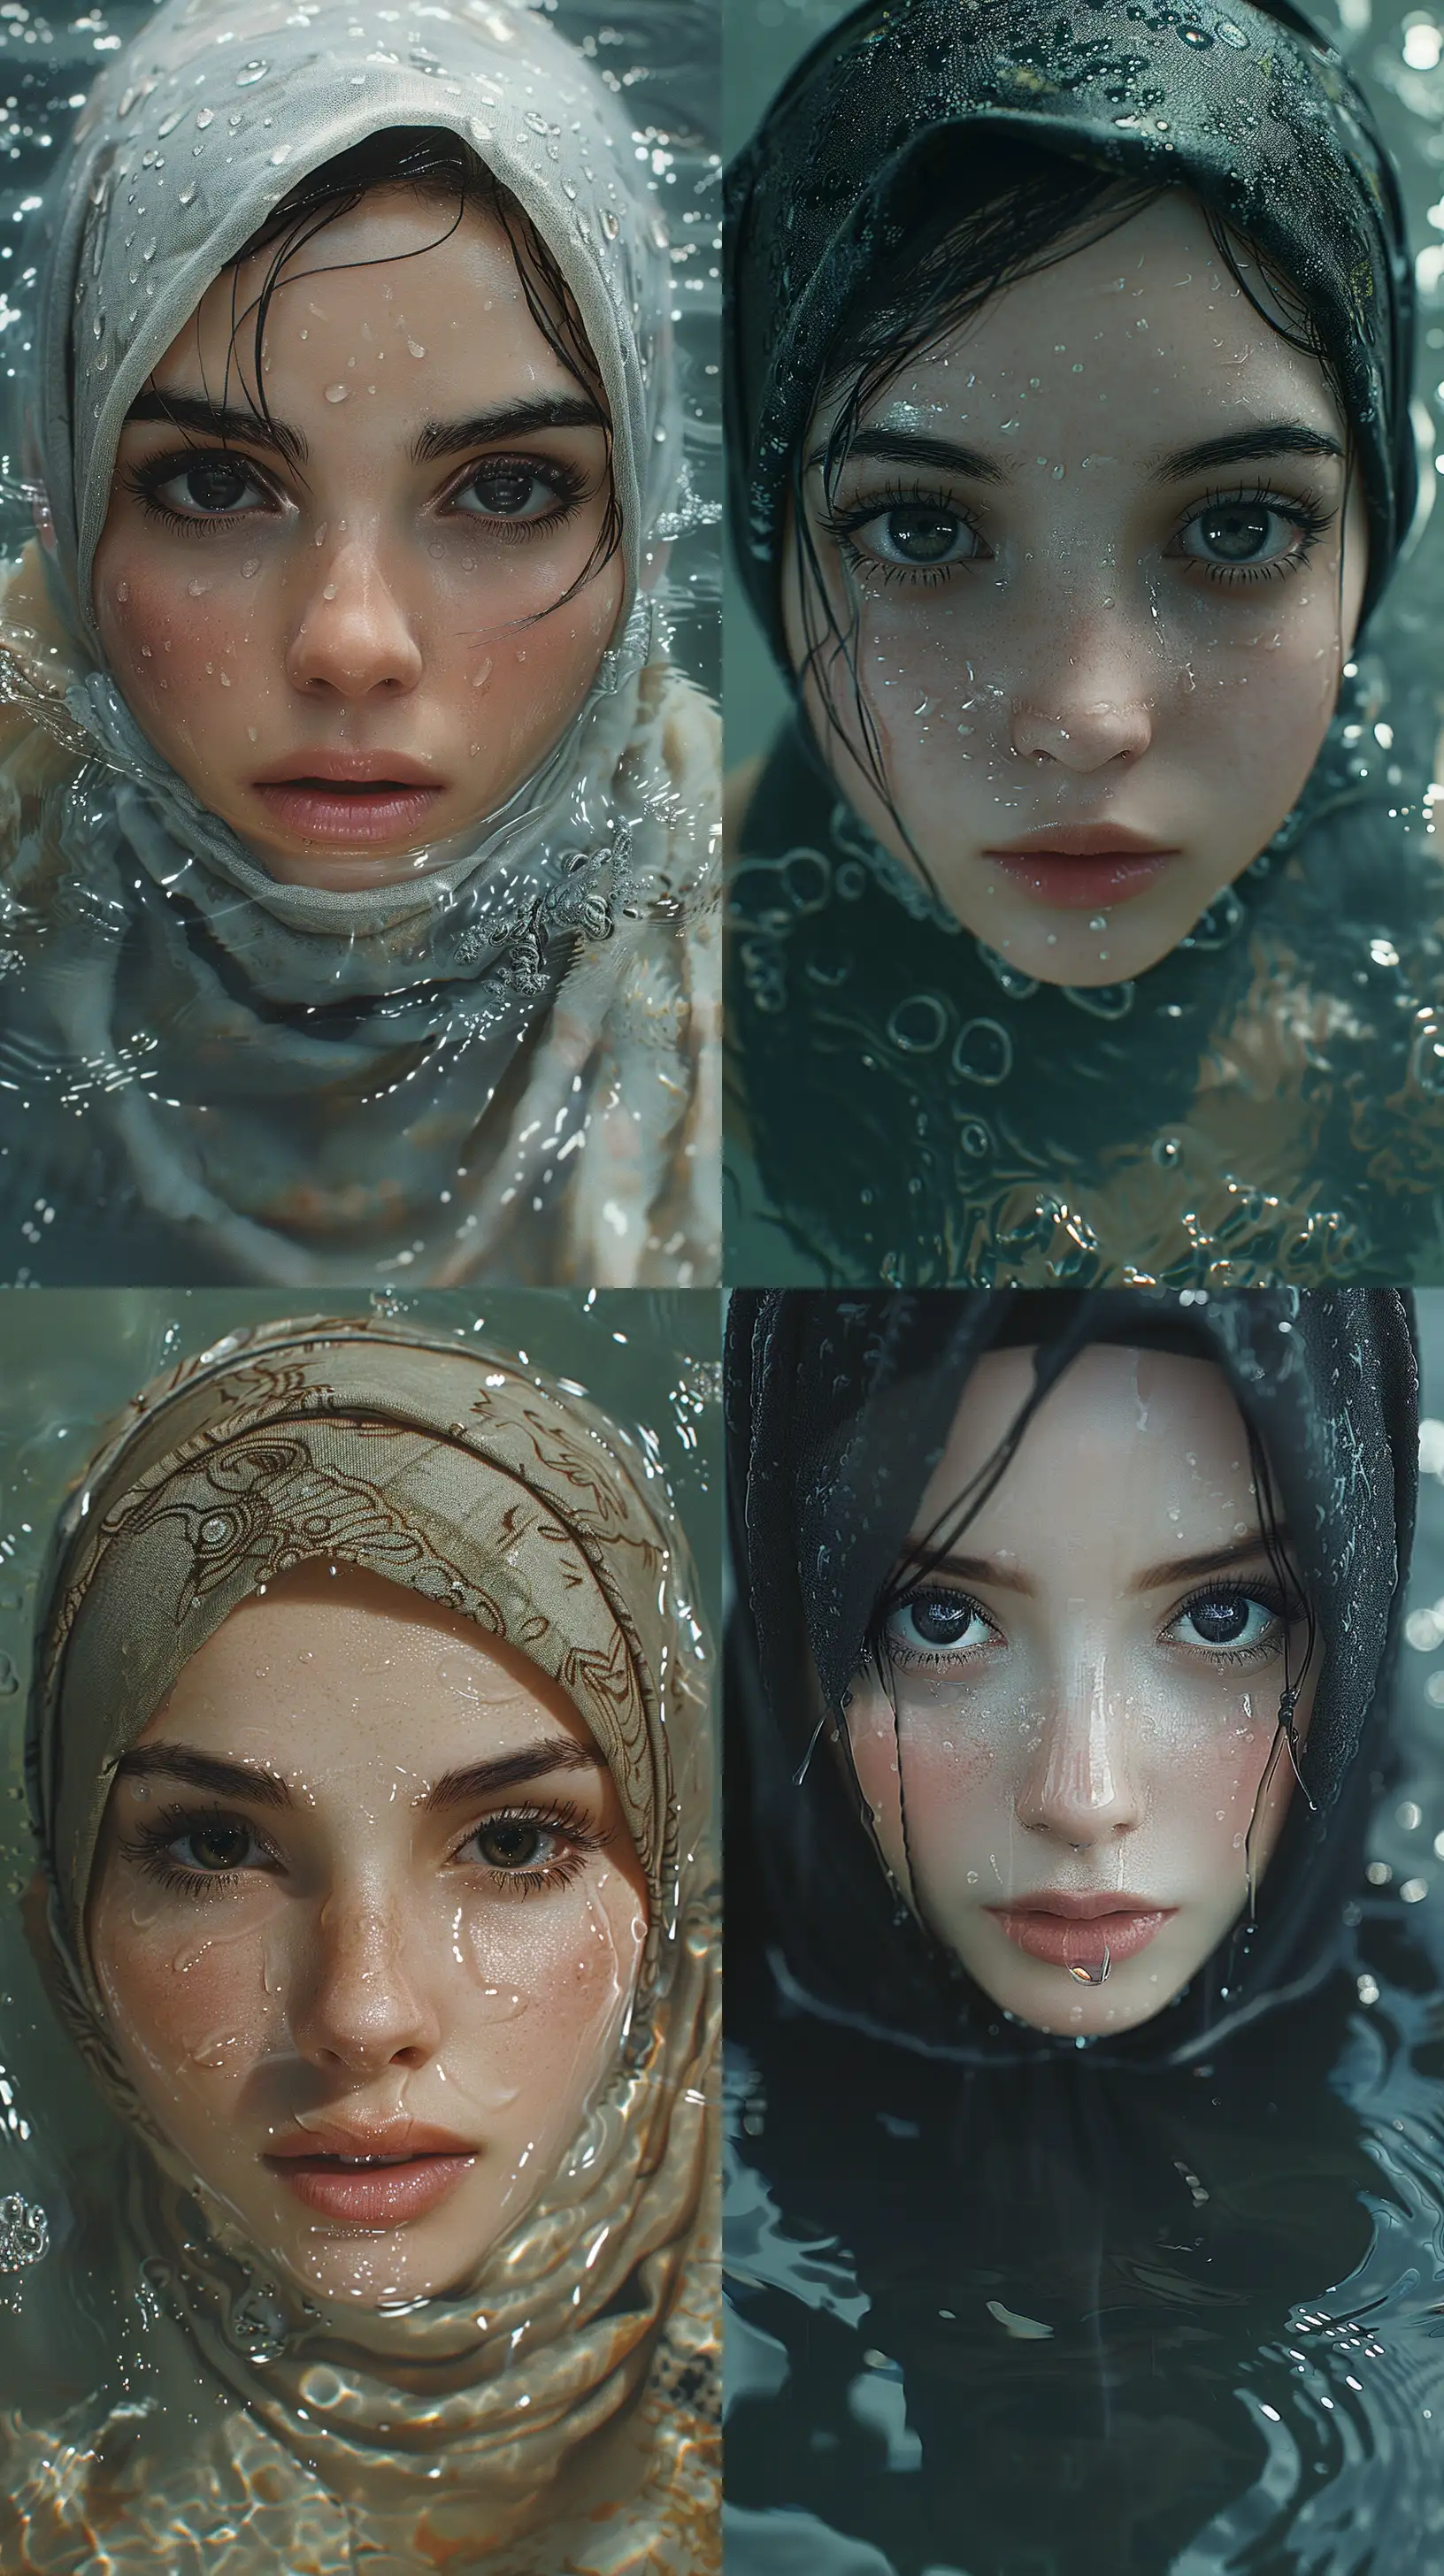 Japanese-Girl-in-Hijab-with-Black-Eyes-Submerged-in-Dystopian-Realism